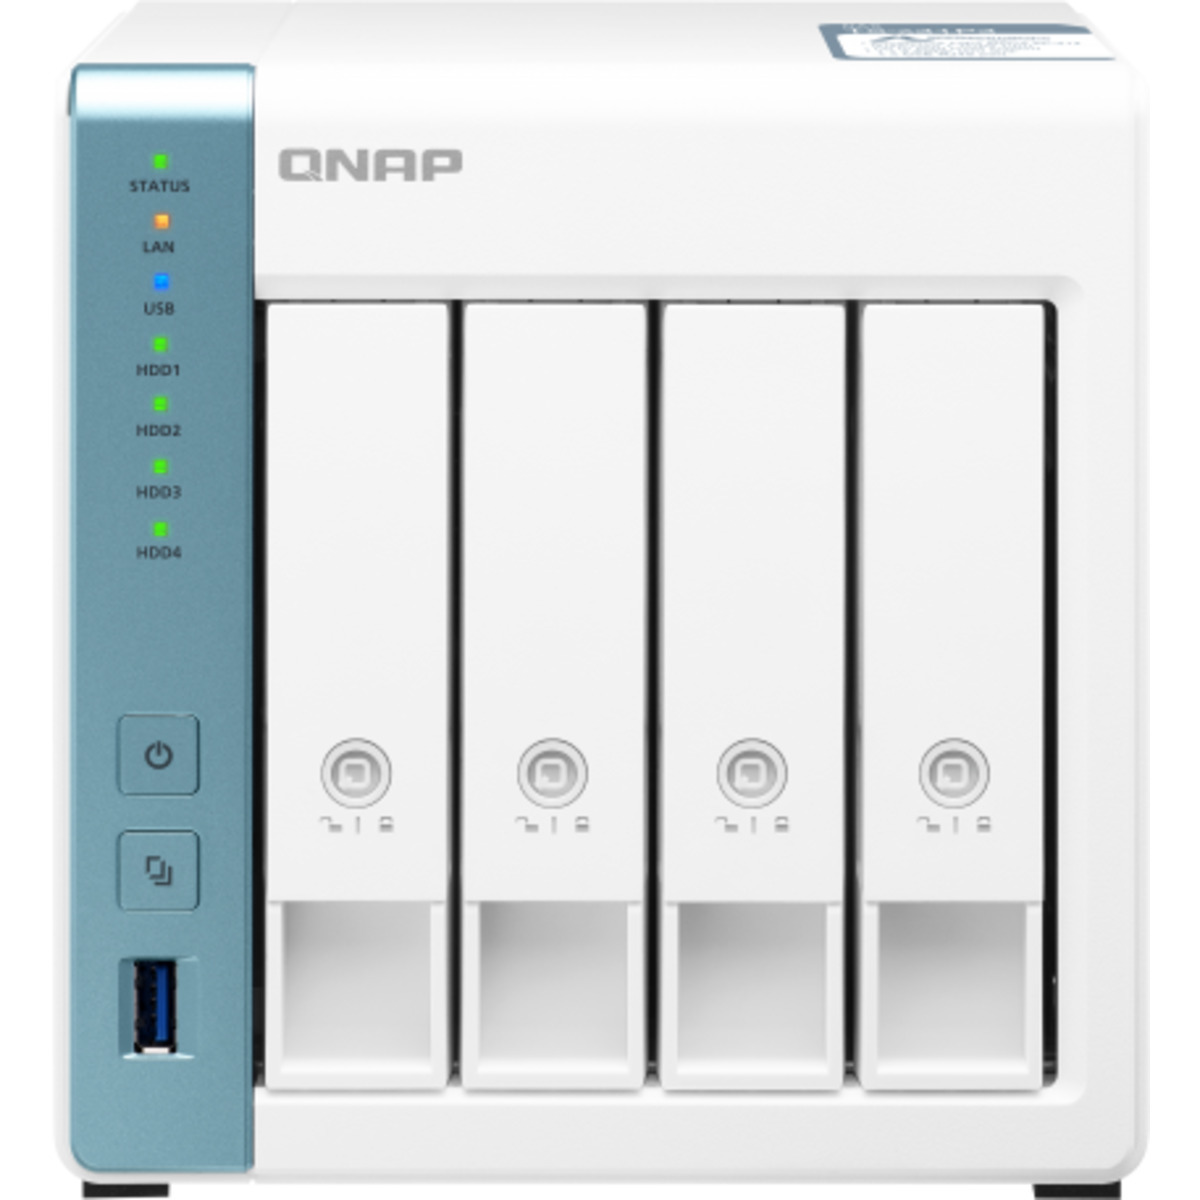 buy $1771 QNAP TS-431P3 48tb Desktop NAS - Network Attached Storage Device 4x12000gb Seagate IronWolf Pro ST12000NT001 3.5 7200rpm SATA 6Gb/s HDD NAS Class Drives Installed - Burn-In Tested - FREE RAM UPGRADE - nas headquarters buy network attached storage server device das new raid-5 free shipping simply usa TS-431P3